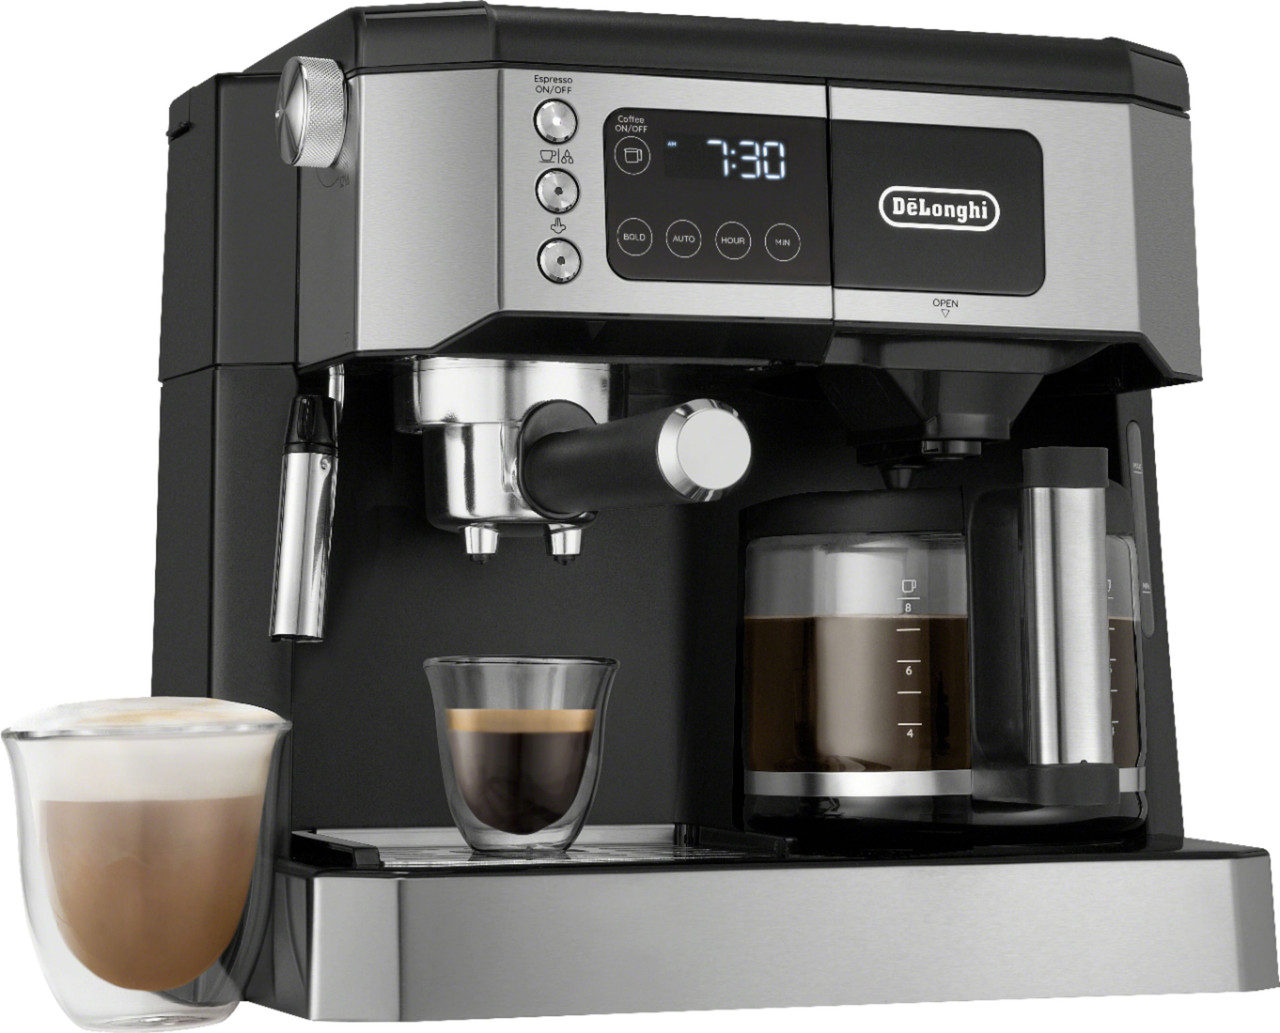 De'Longhi Digital All-in-One Combination Coffee and Espresso Machine - Black and Stainless Steel